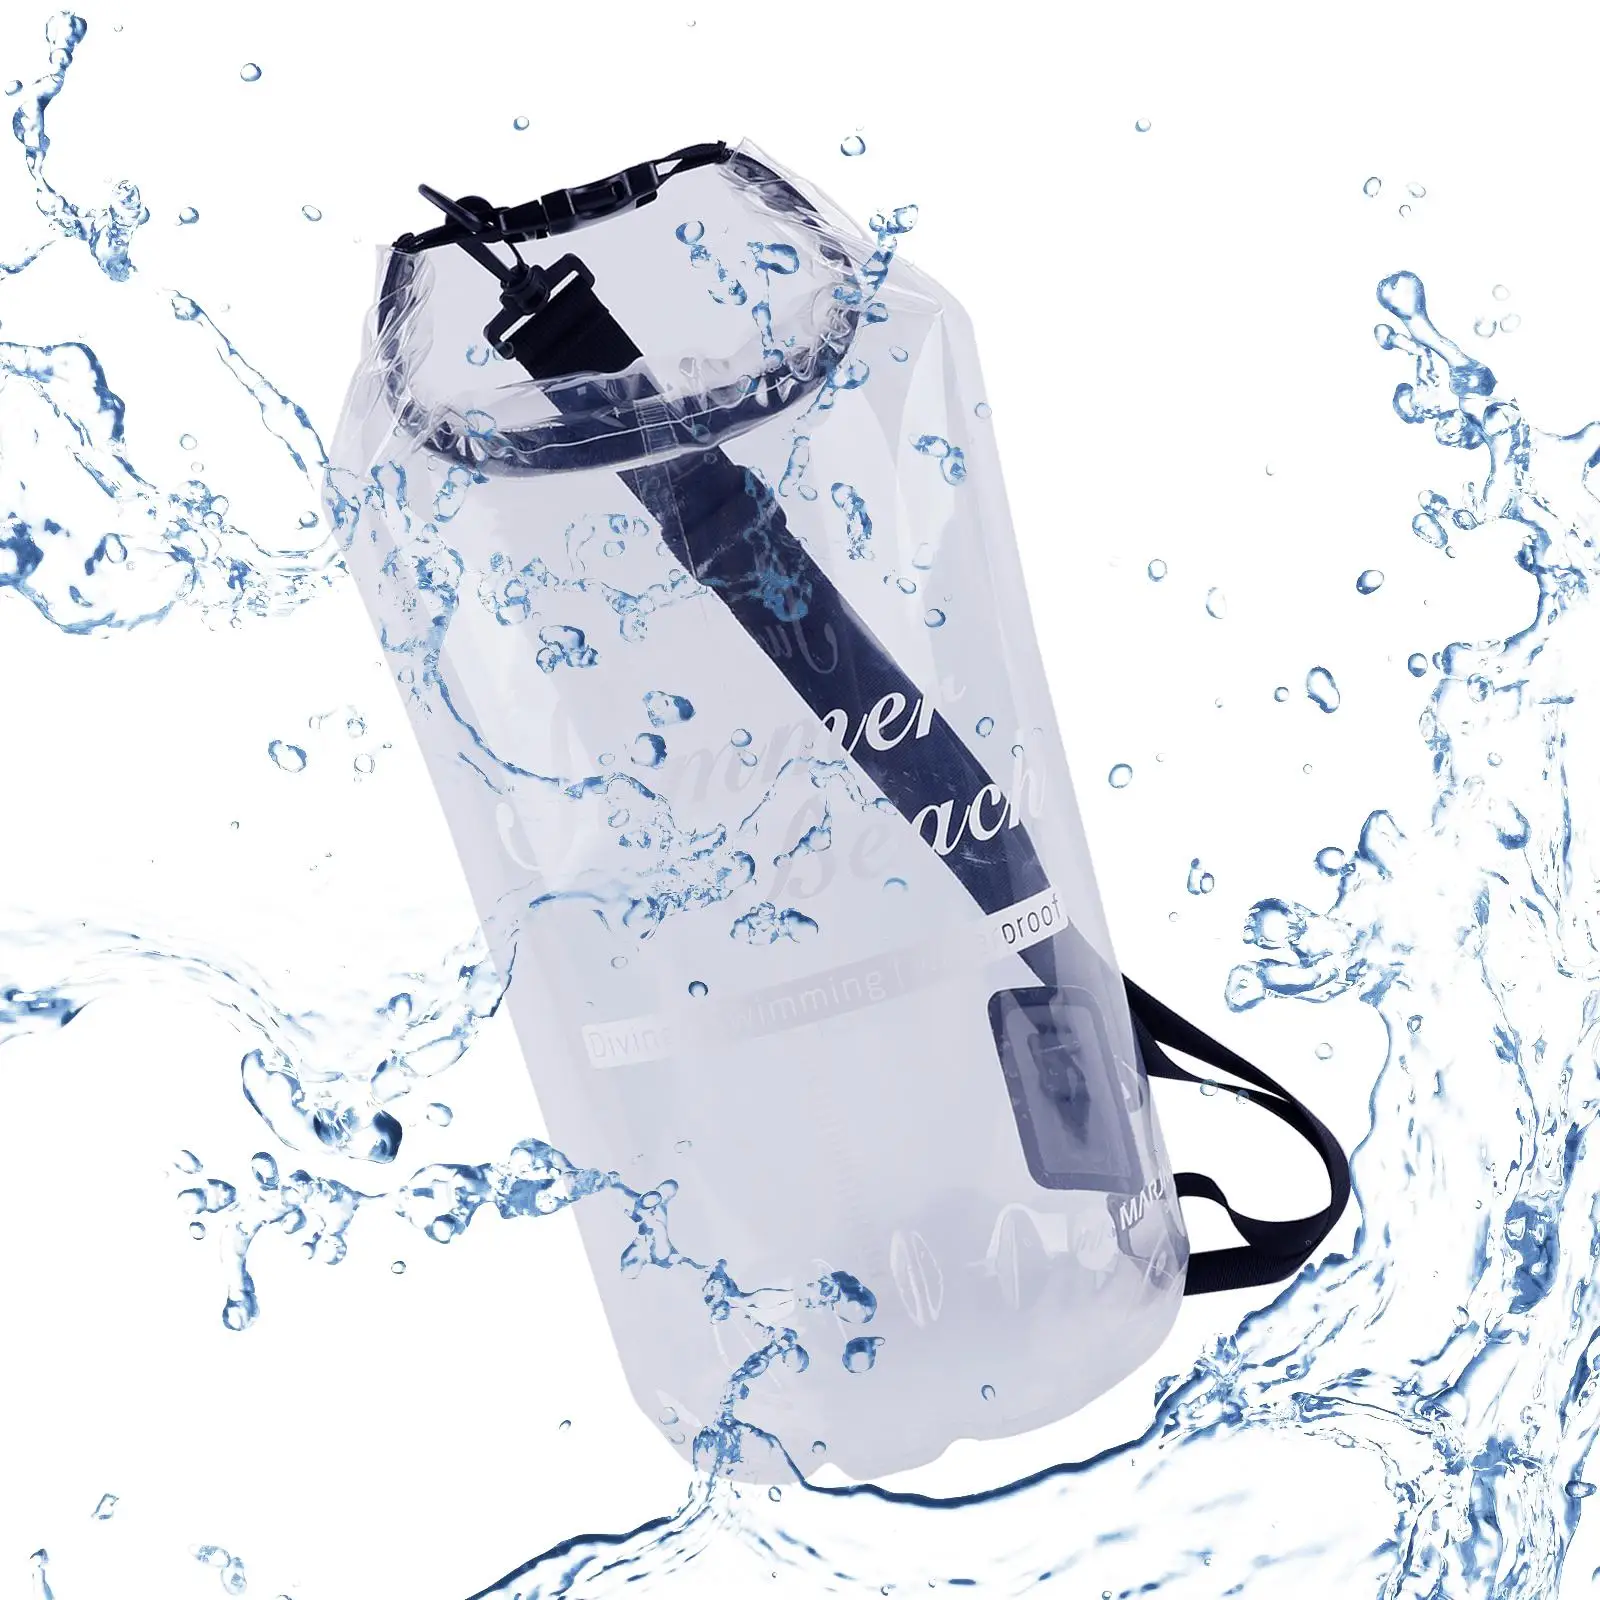 Floating Waterproof Bag Portable Backpack Airtight Roll up Top for Boating